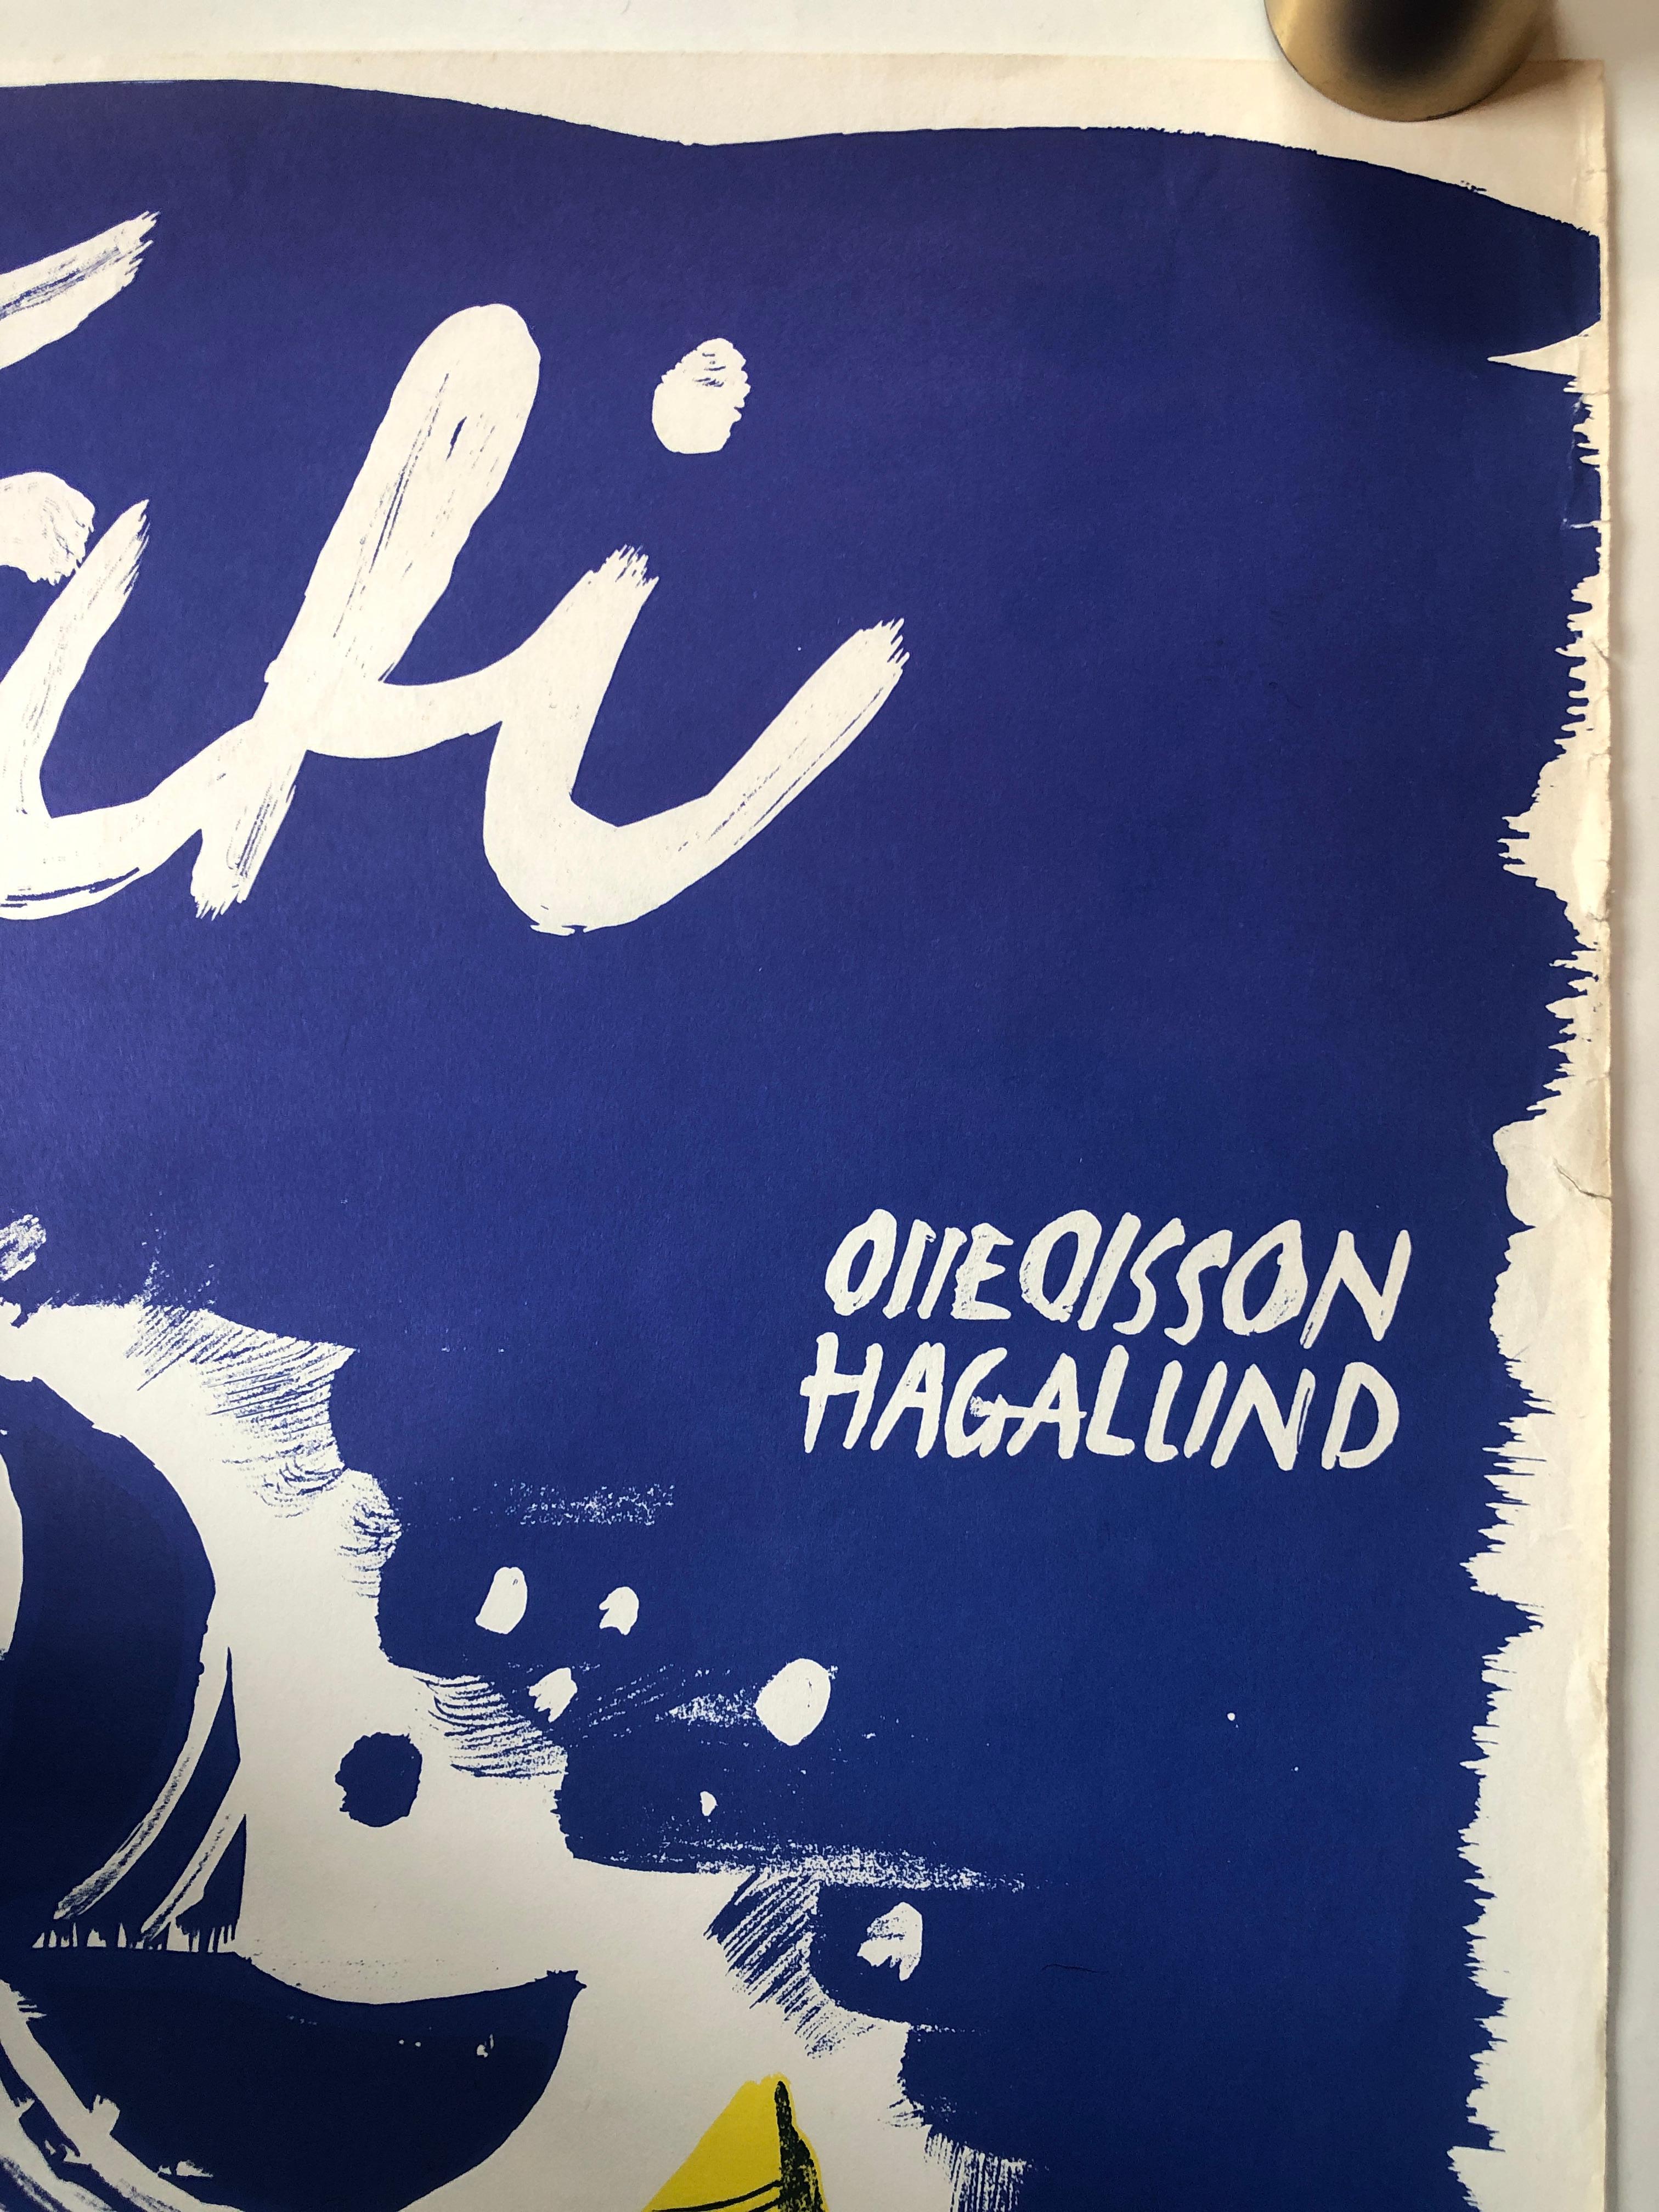 Paper 'Mon Oncle' Original Vintage Movie Poster by Olle Olsson Hagalund, Swedish, 1959 For Sale